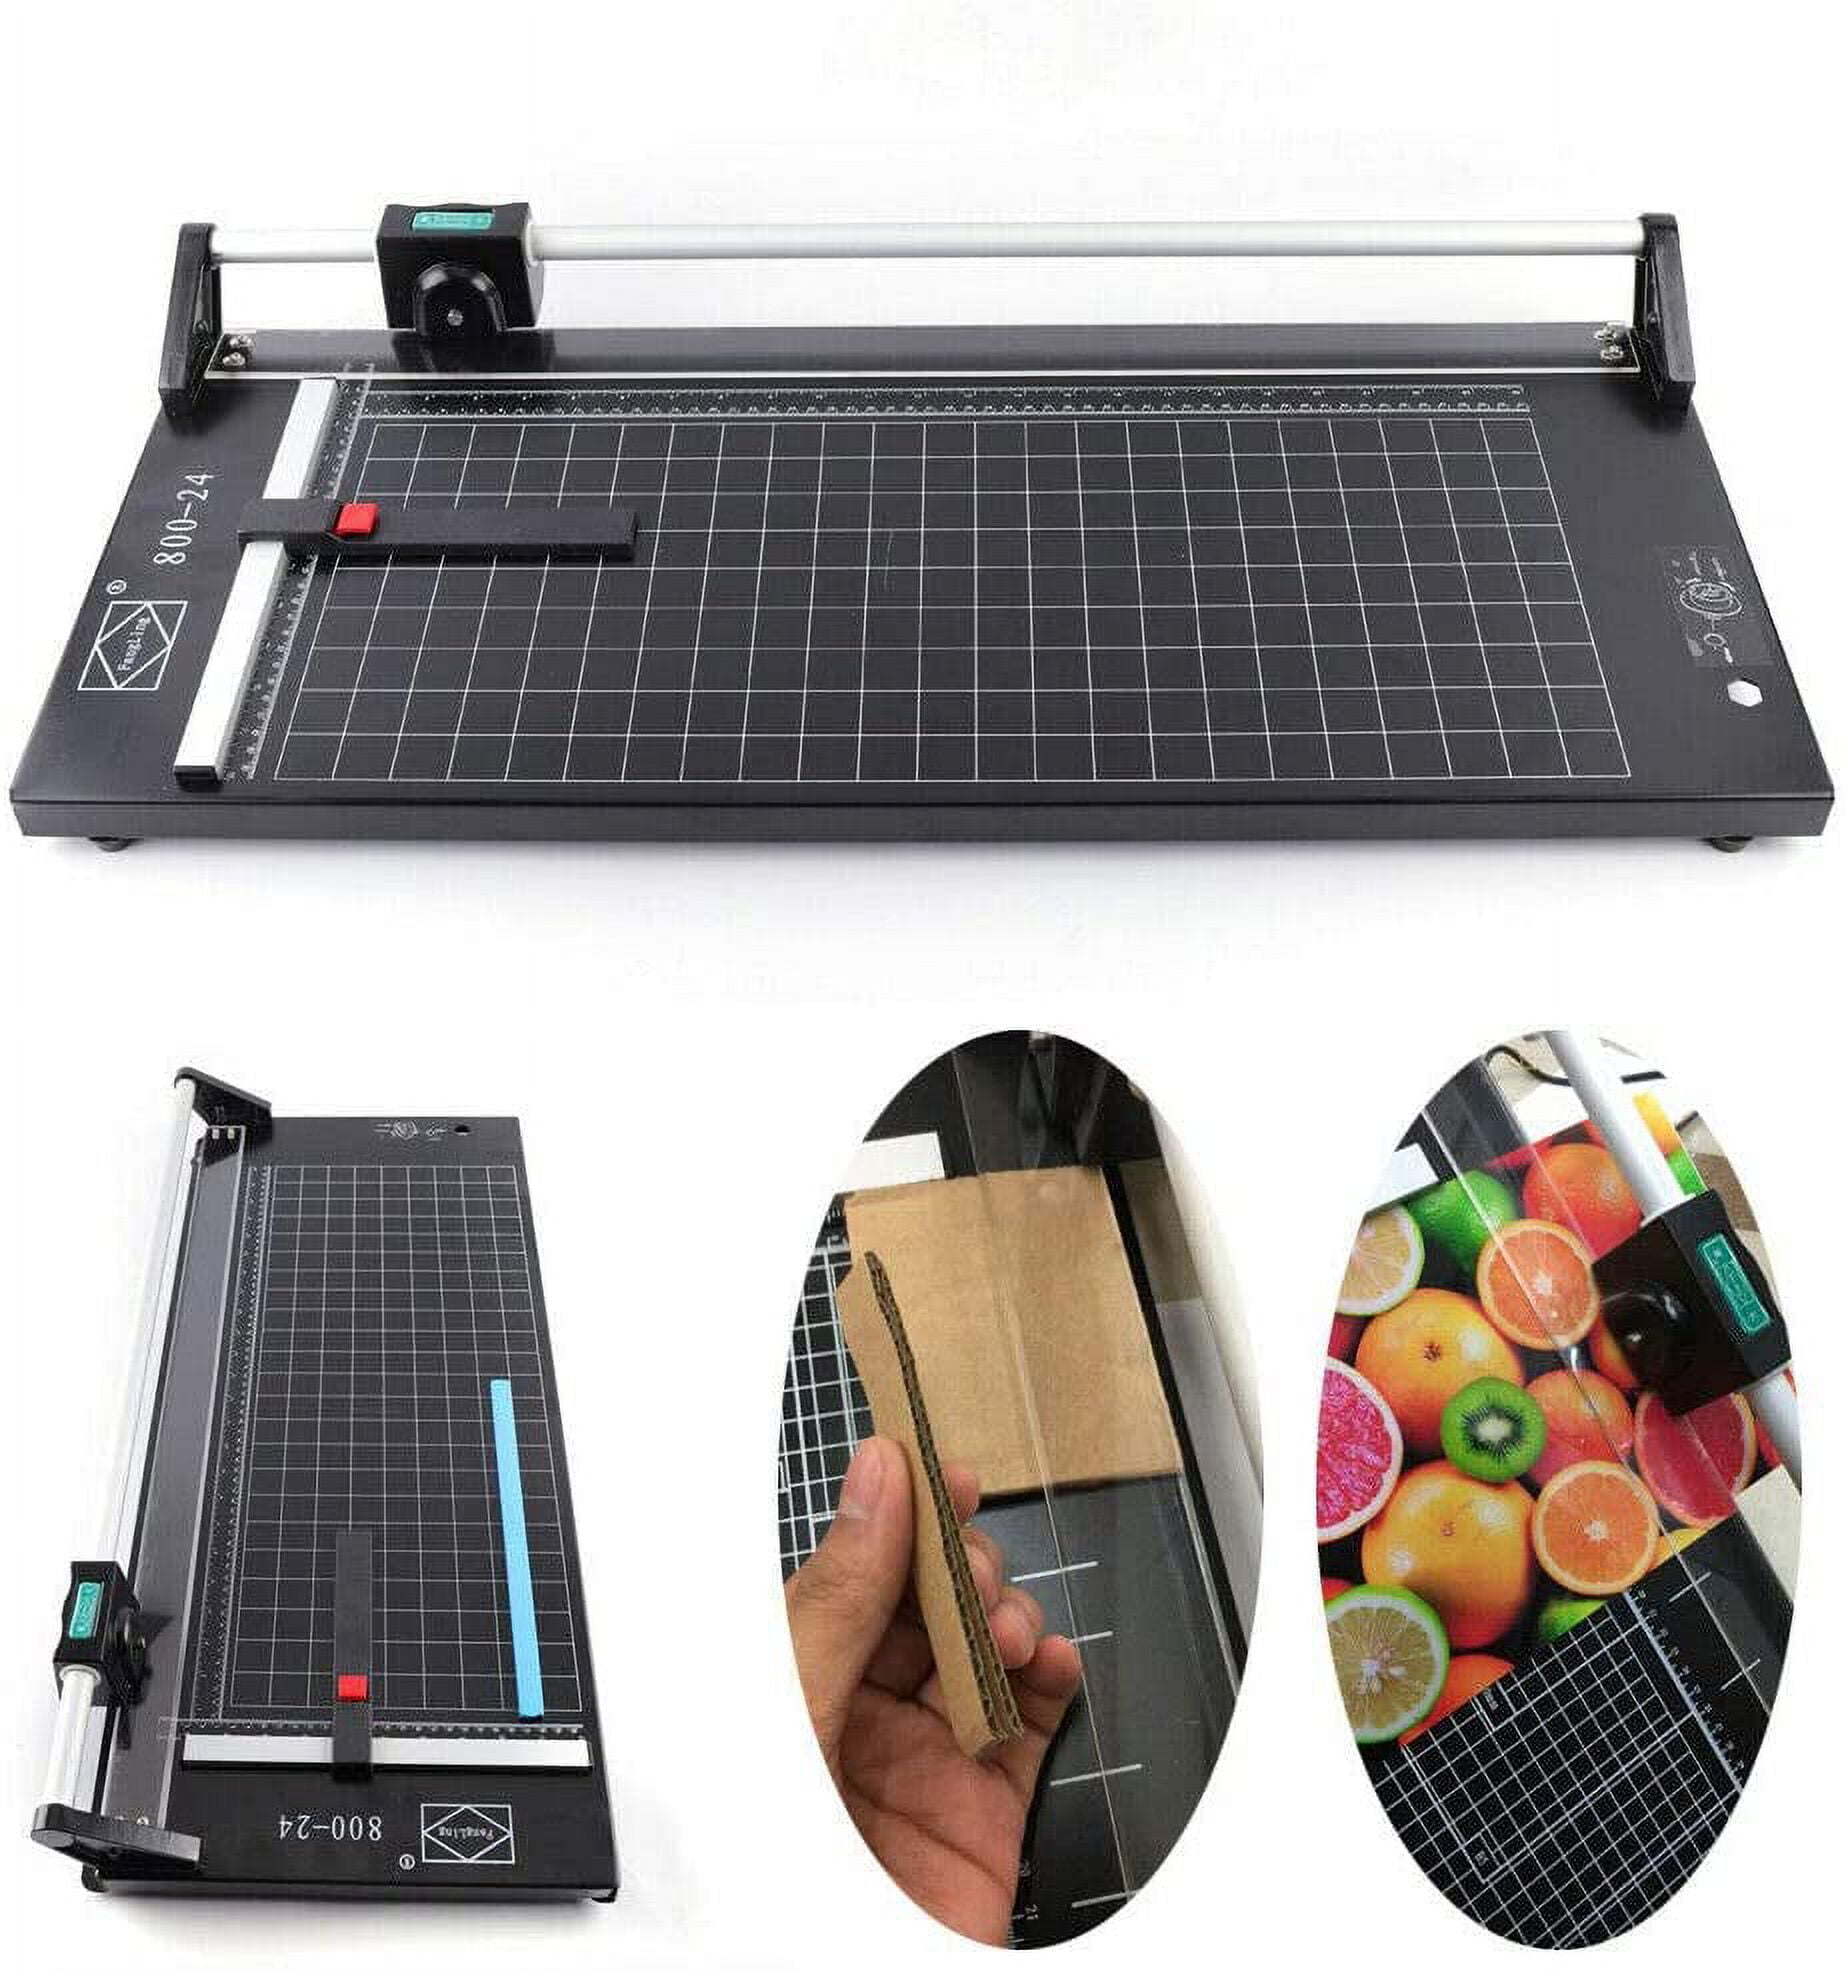 Yiyibyus Commercial Manual Precision Rotary Paper Trimmer Cutter Heavy Duty